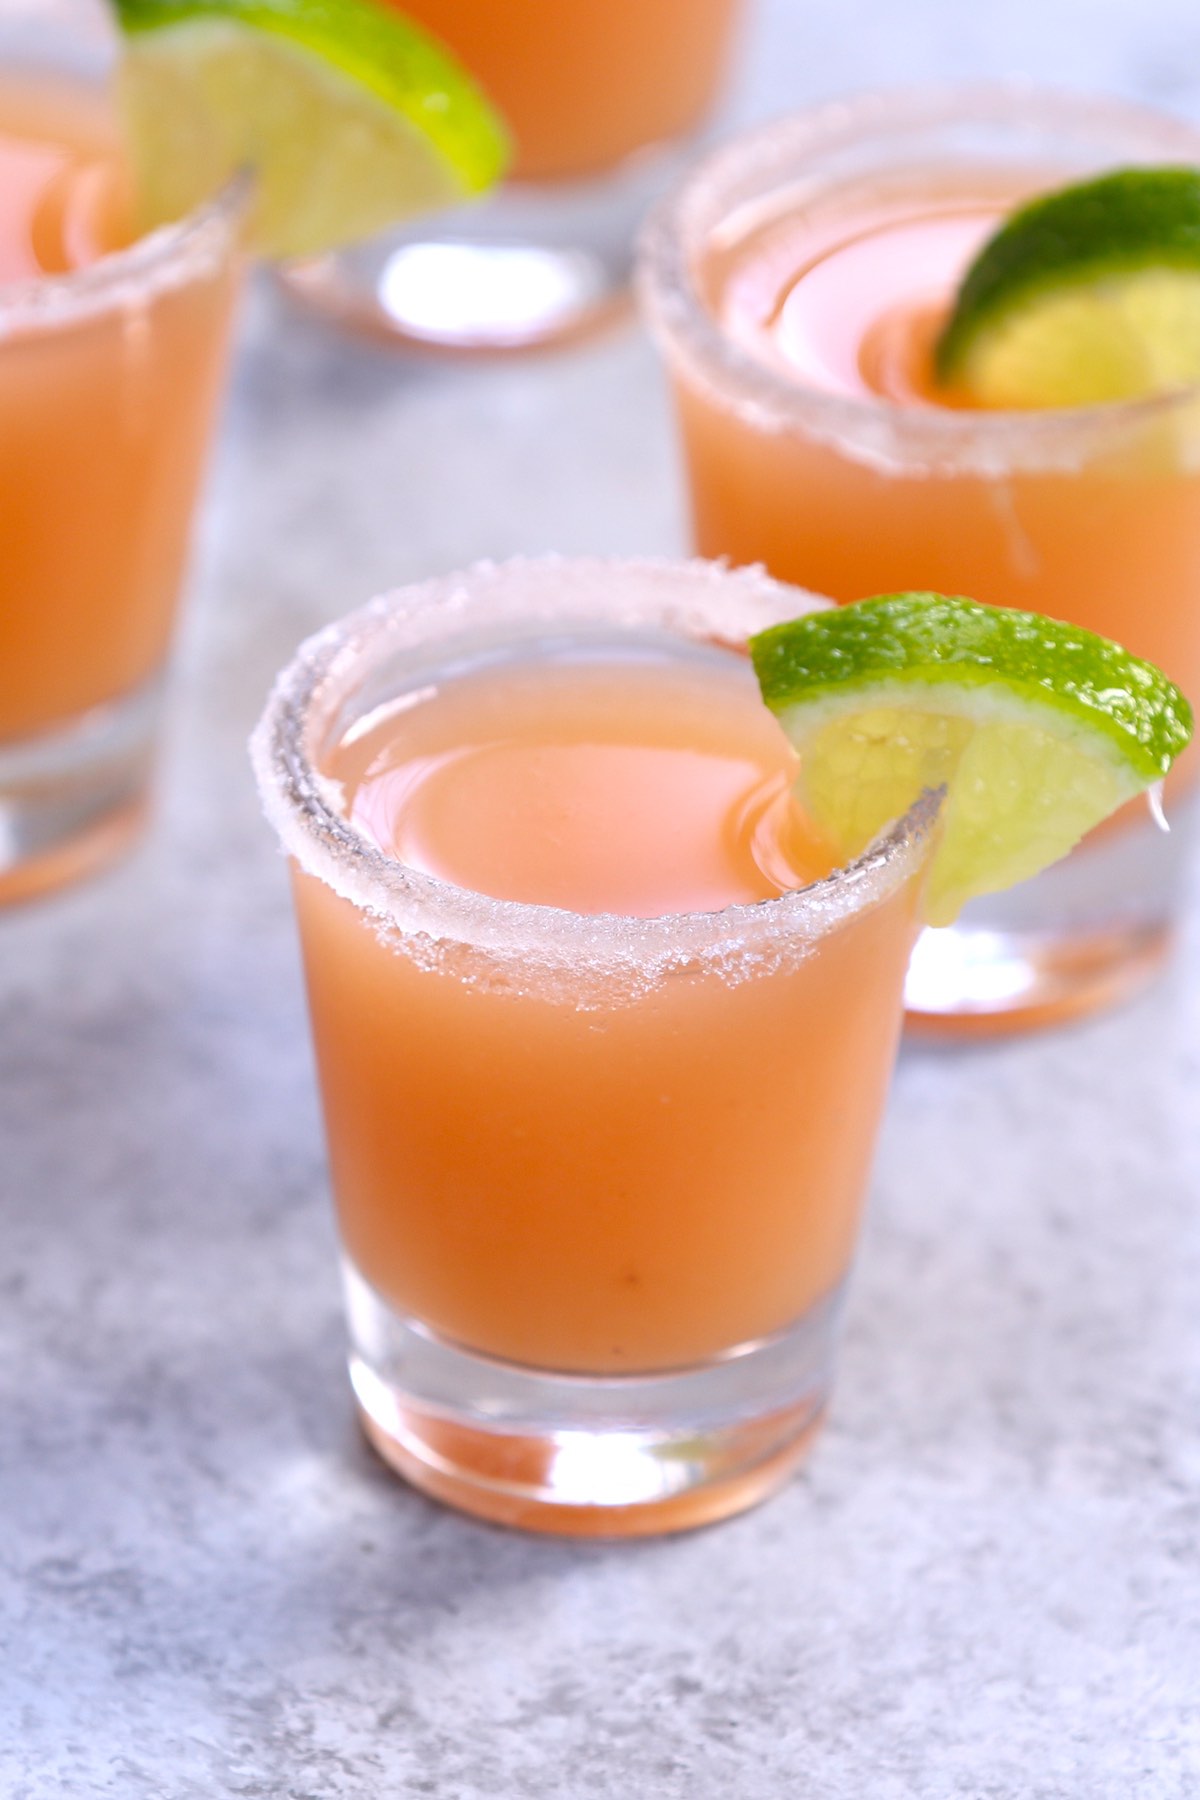 Mexican Candy Shot is sure to impress your family and friends at your next dinner party! It’s sweet and slightly spicy with lots of fruity flavors. This recipe is easy to make, and you can customize it with different flavors like watermelon, strawberry, or guava juice.